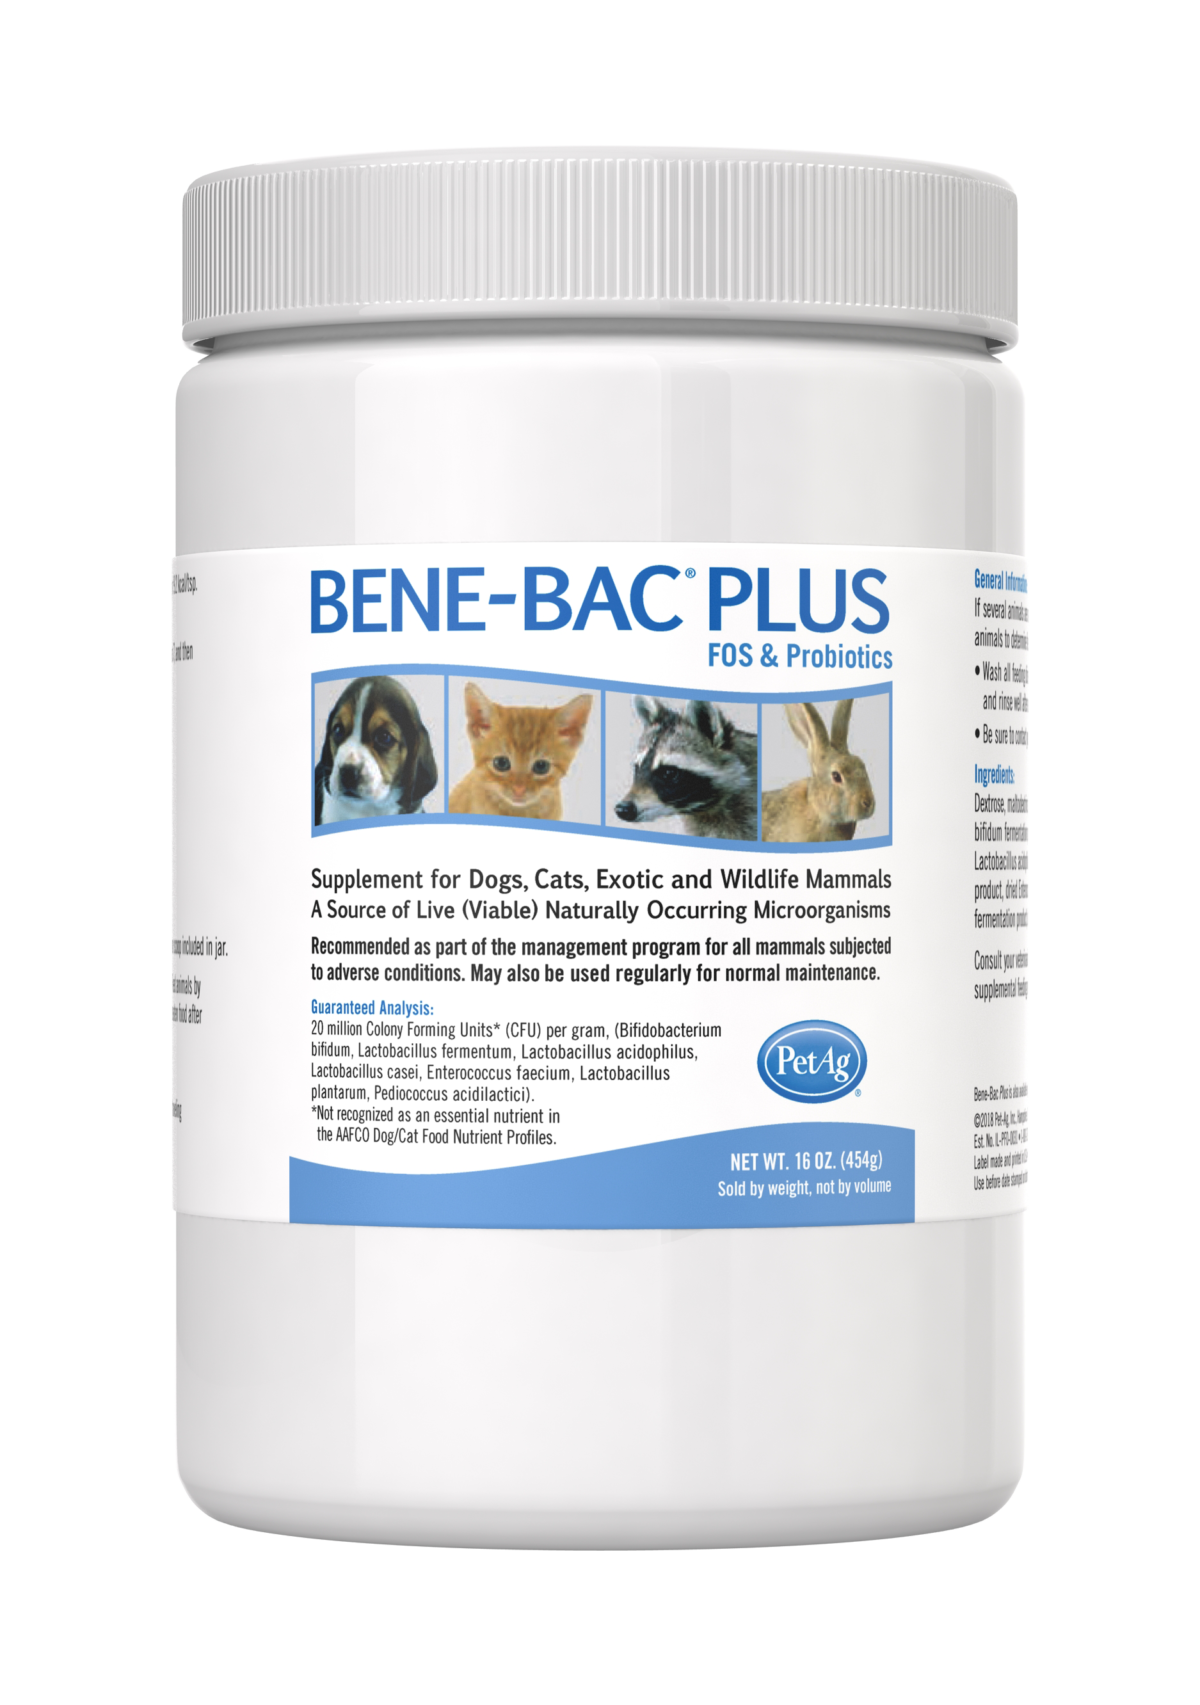 https://www.petag.com/assets/images/Products/Nutrition/_productZoom/99545-1-Bene-Bac-Plus_PetPowder_1lb-Frnt.png